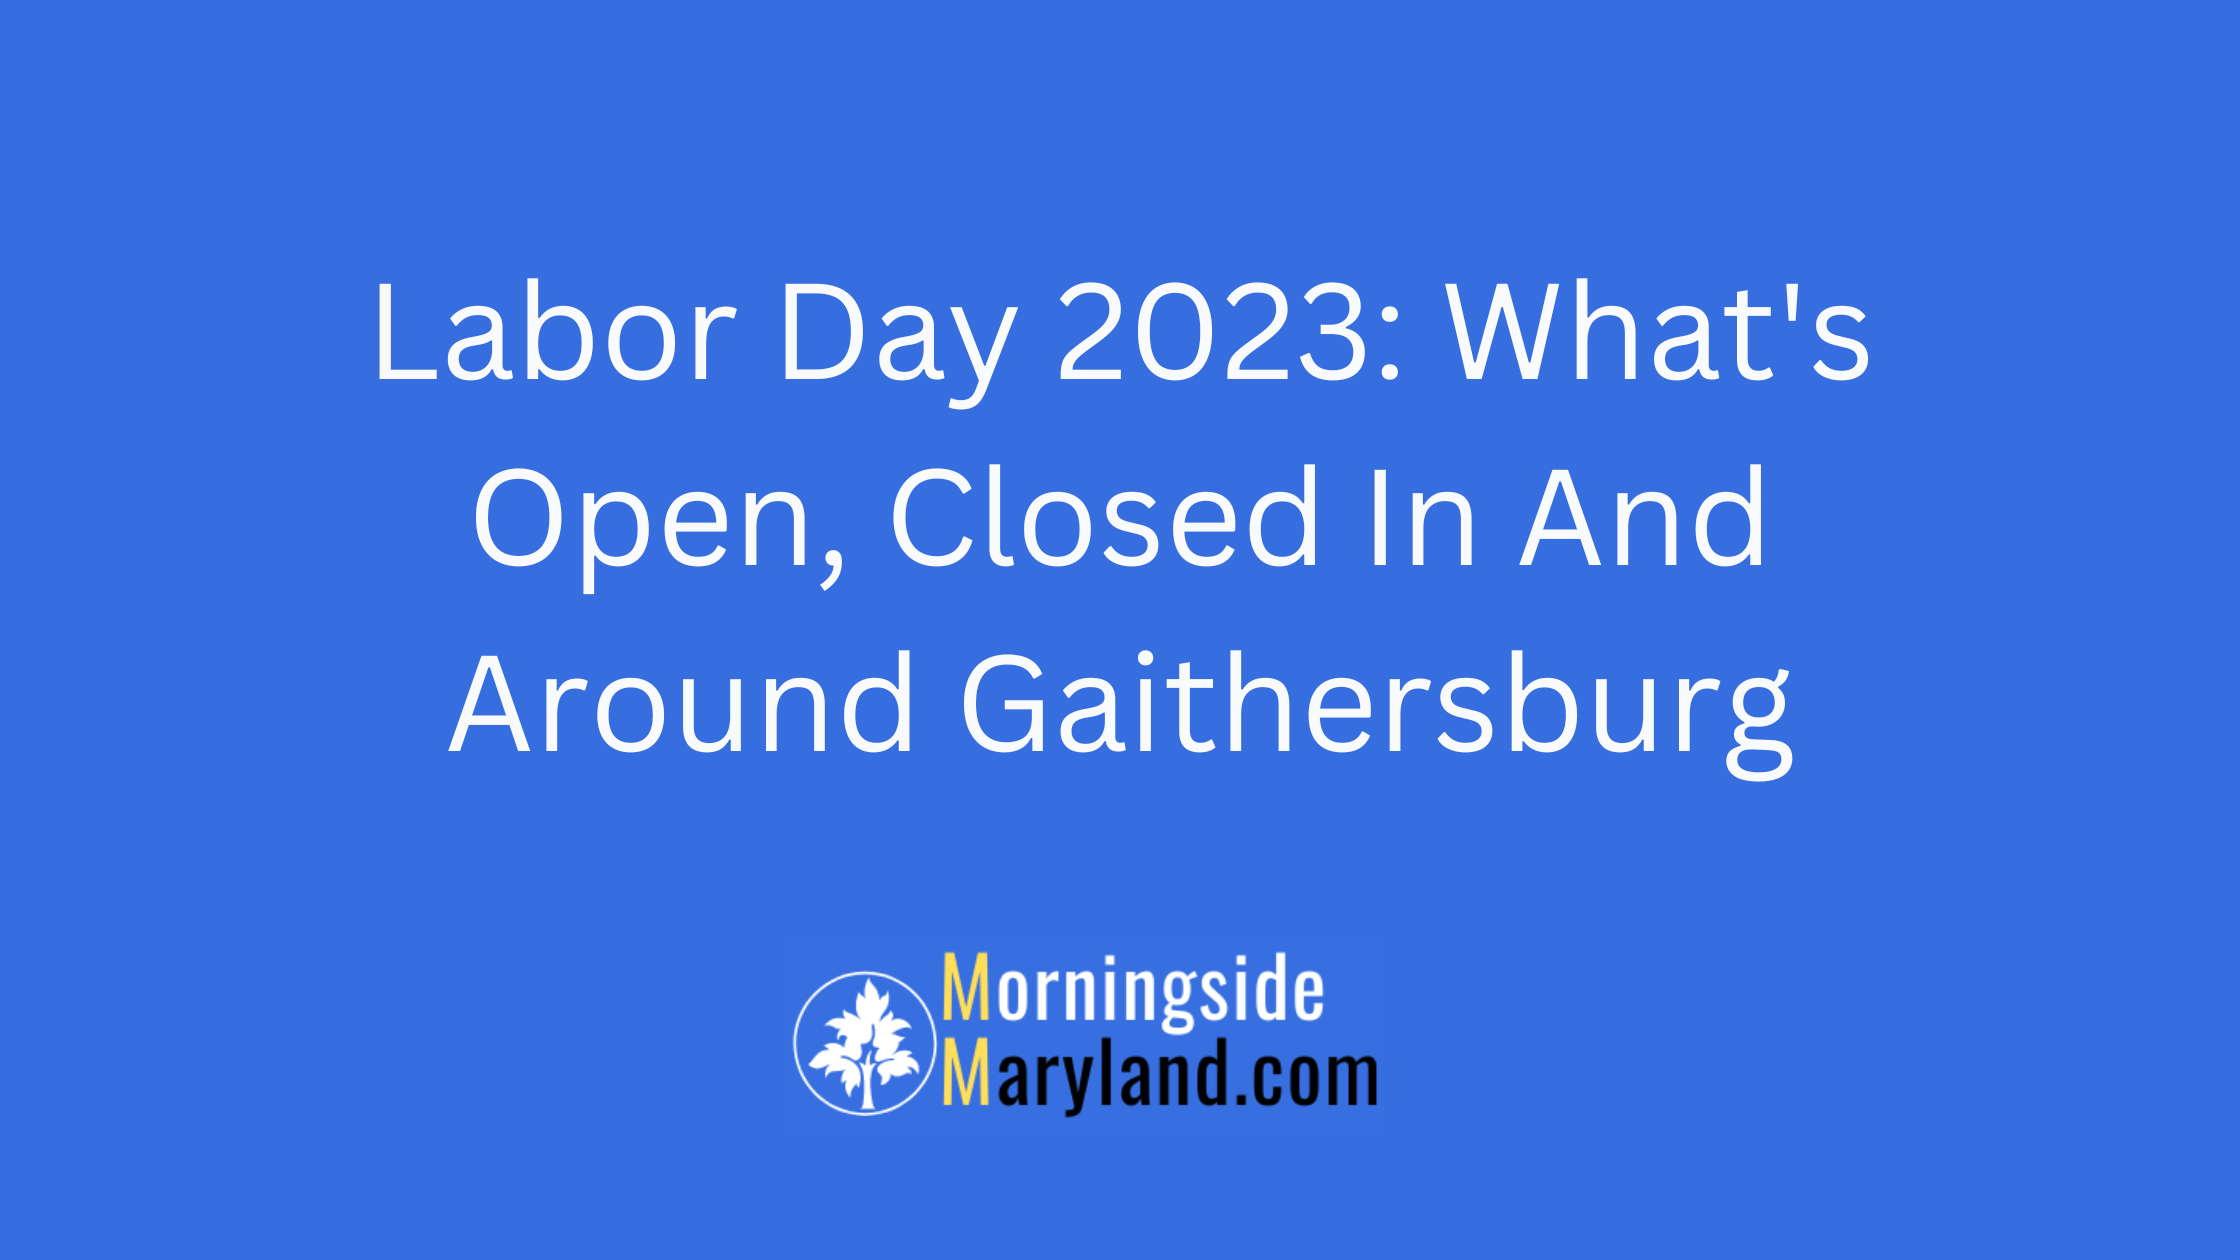 Labor Day 2023: What's Open, Closed In And Around Gaithersburg